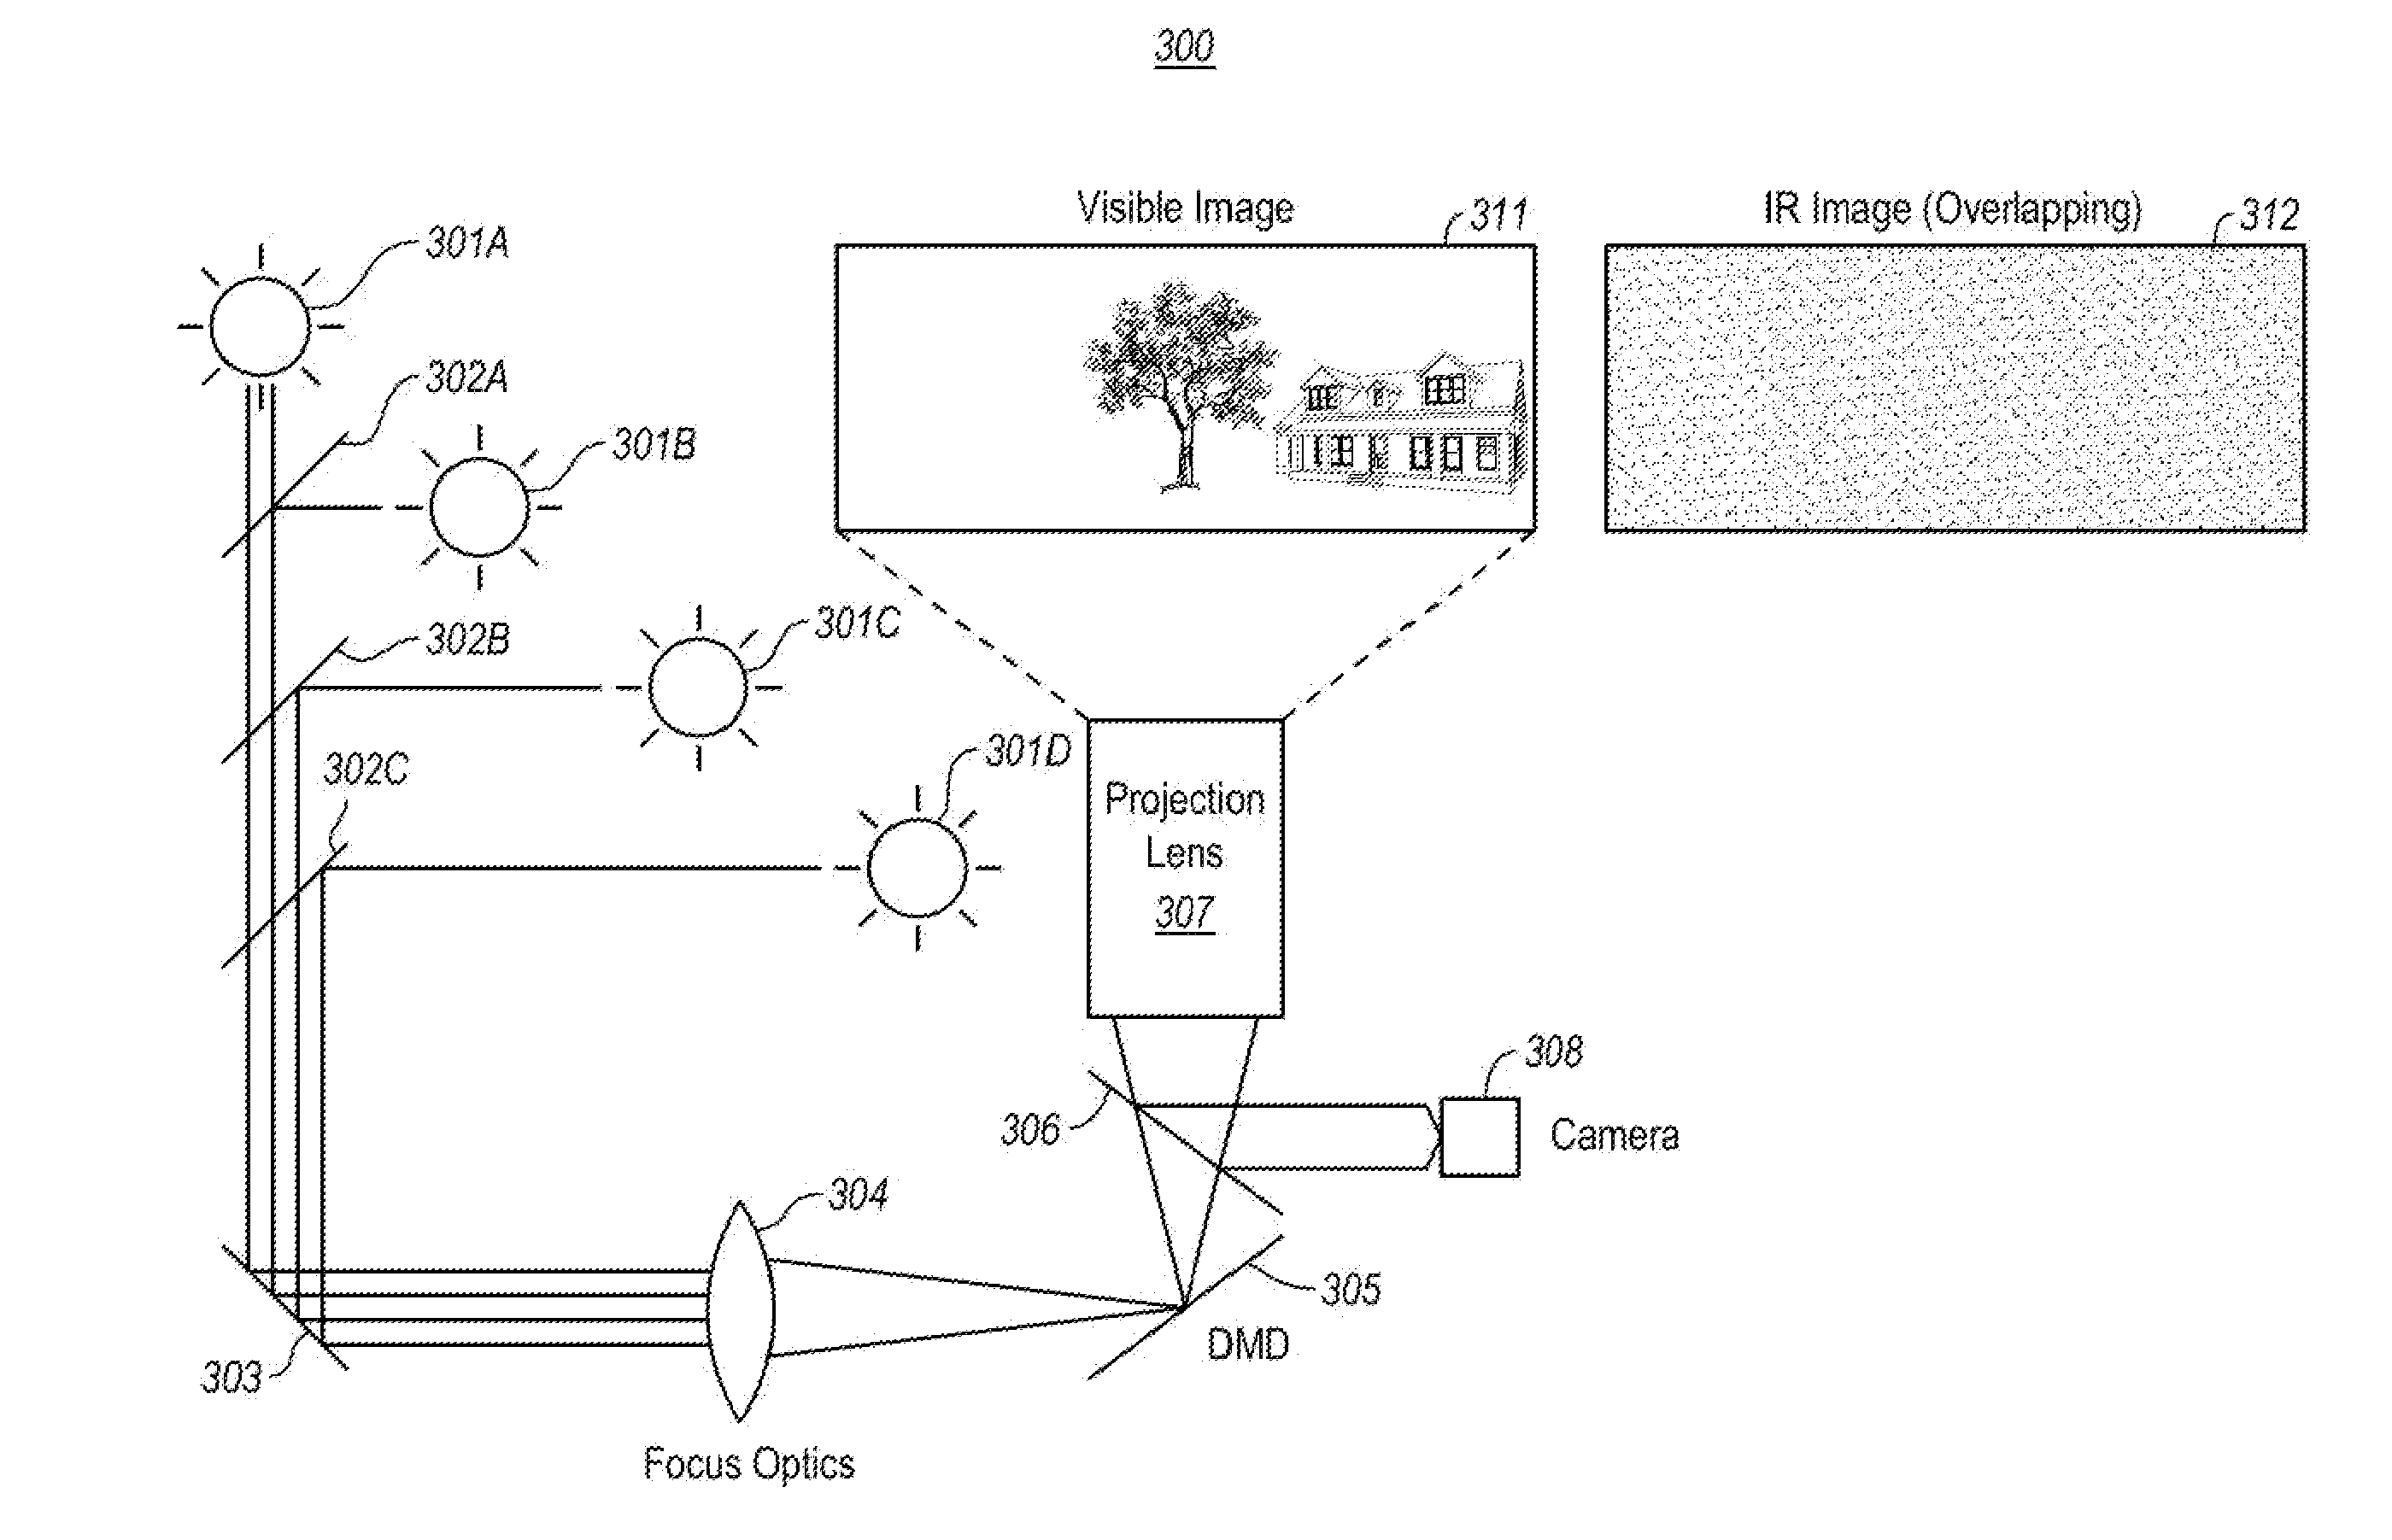 Projector for projecting visible and non-visible images